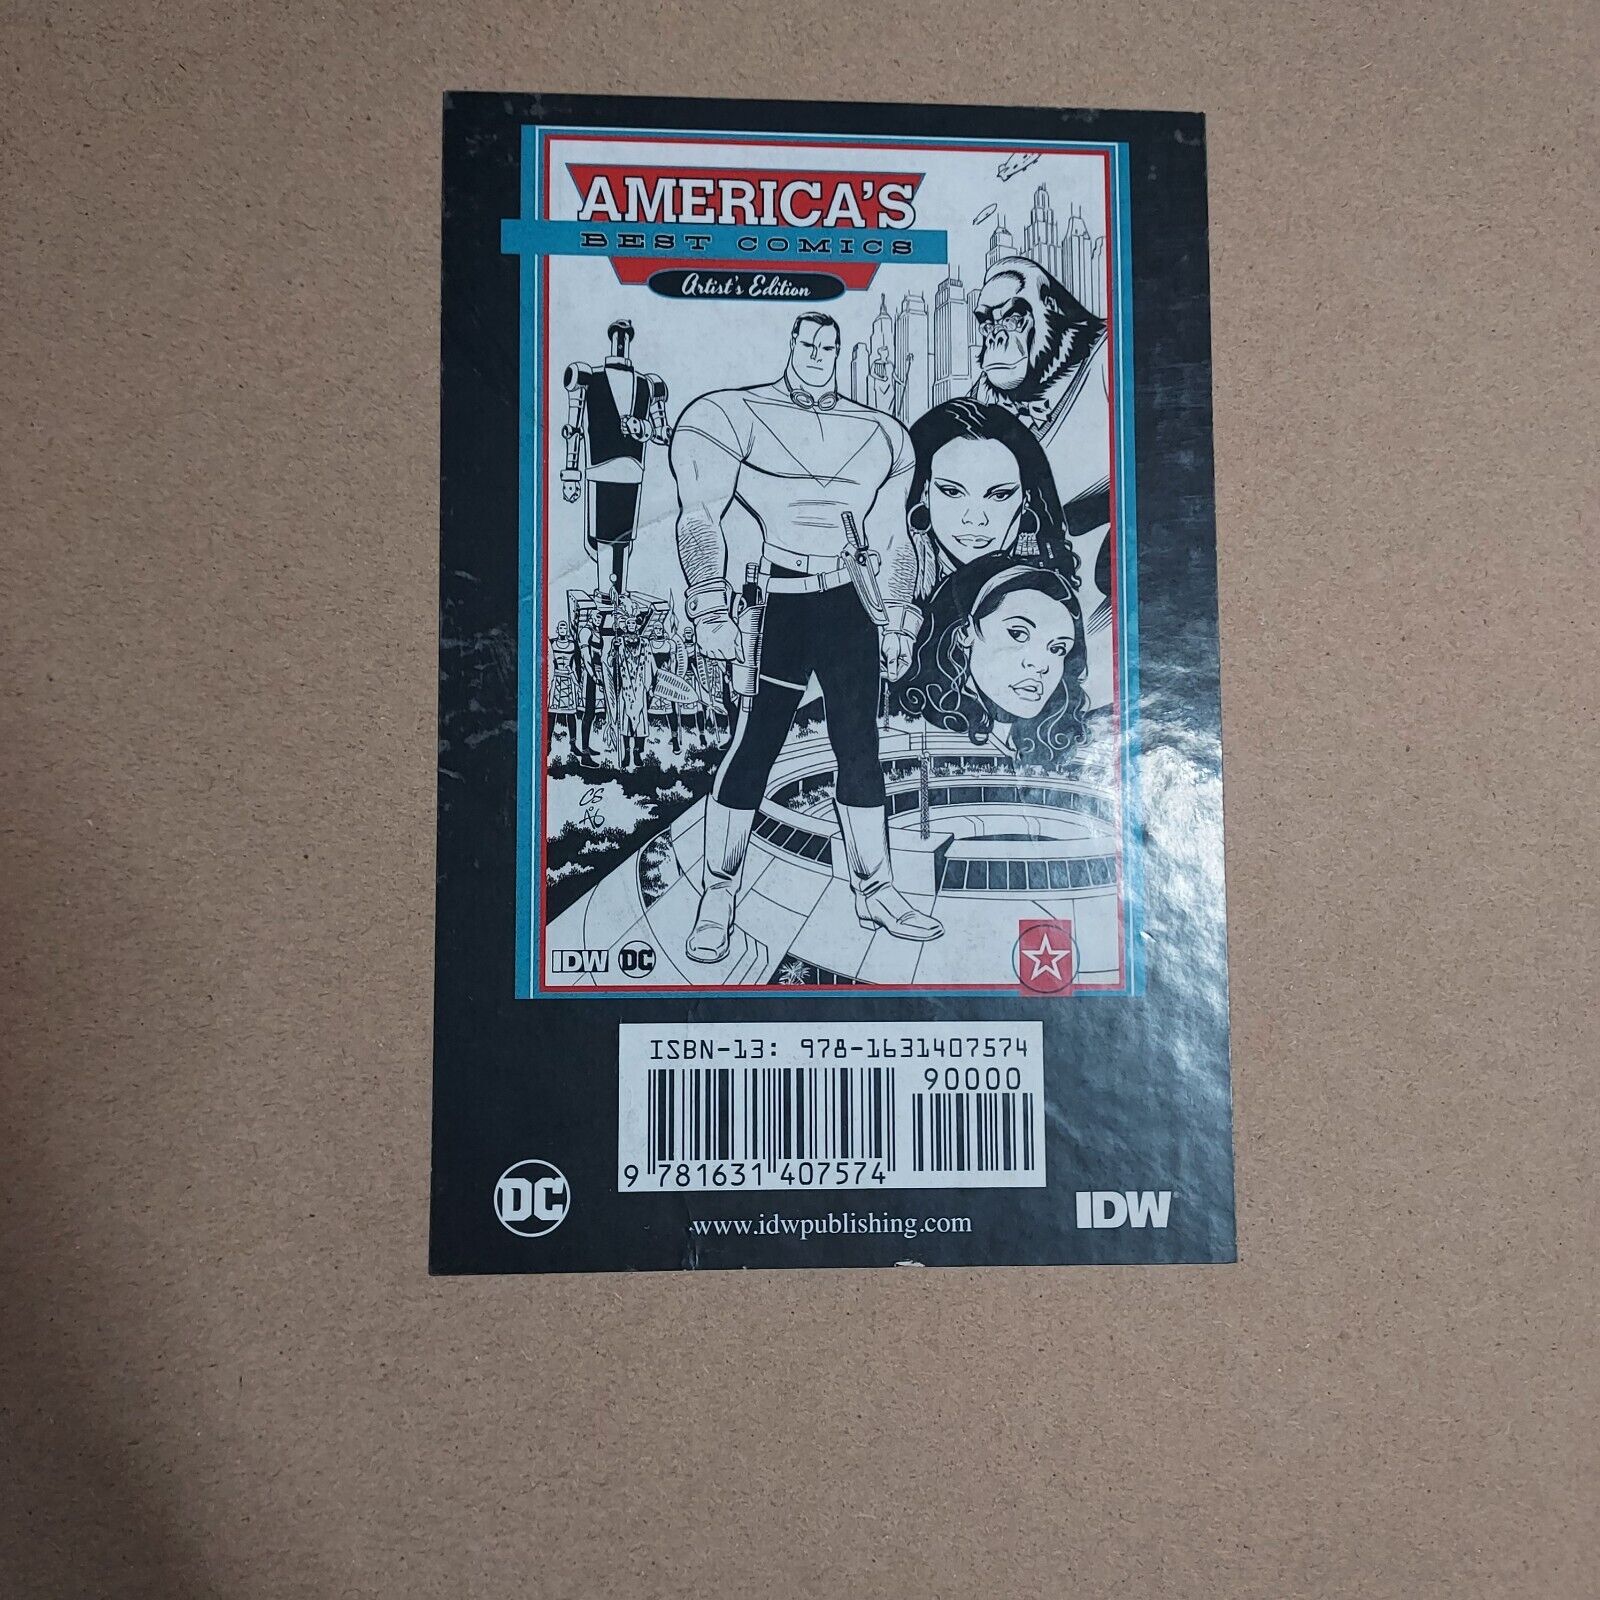 AMERICA'S BEST COMICS ARTIST'S EDITION HC IDW TOM STRONG SPROUSE COVER New